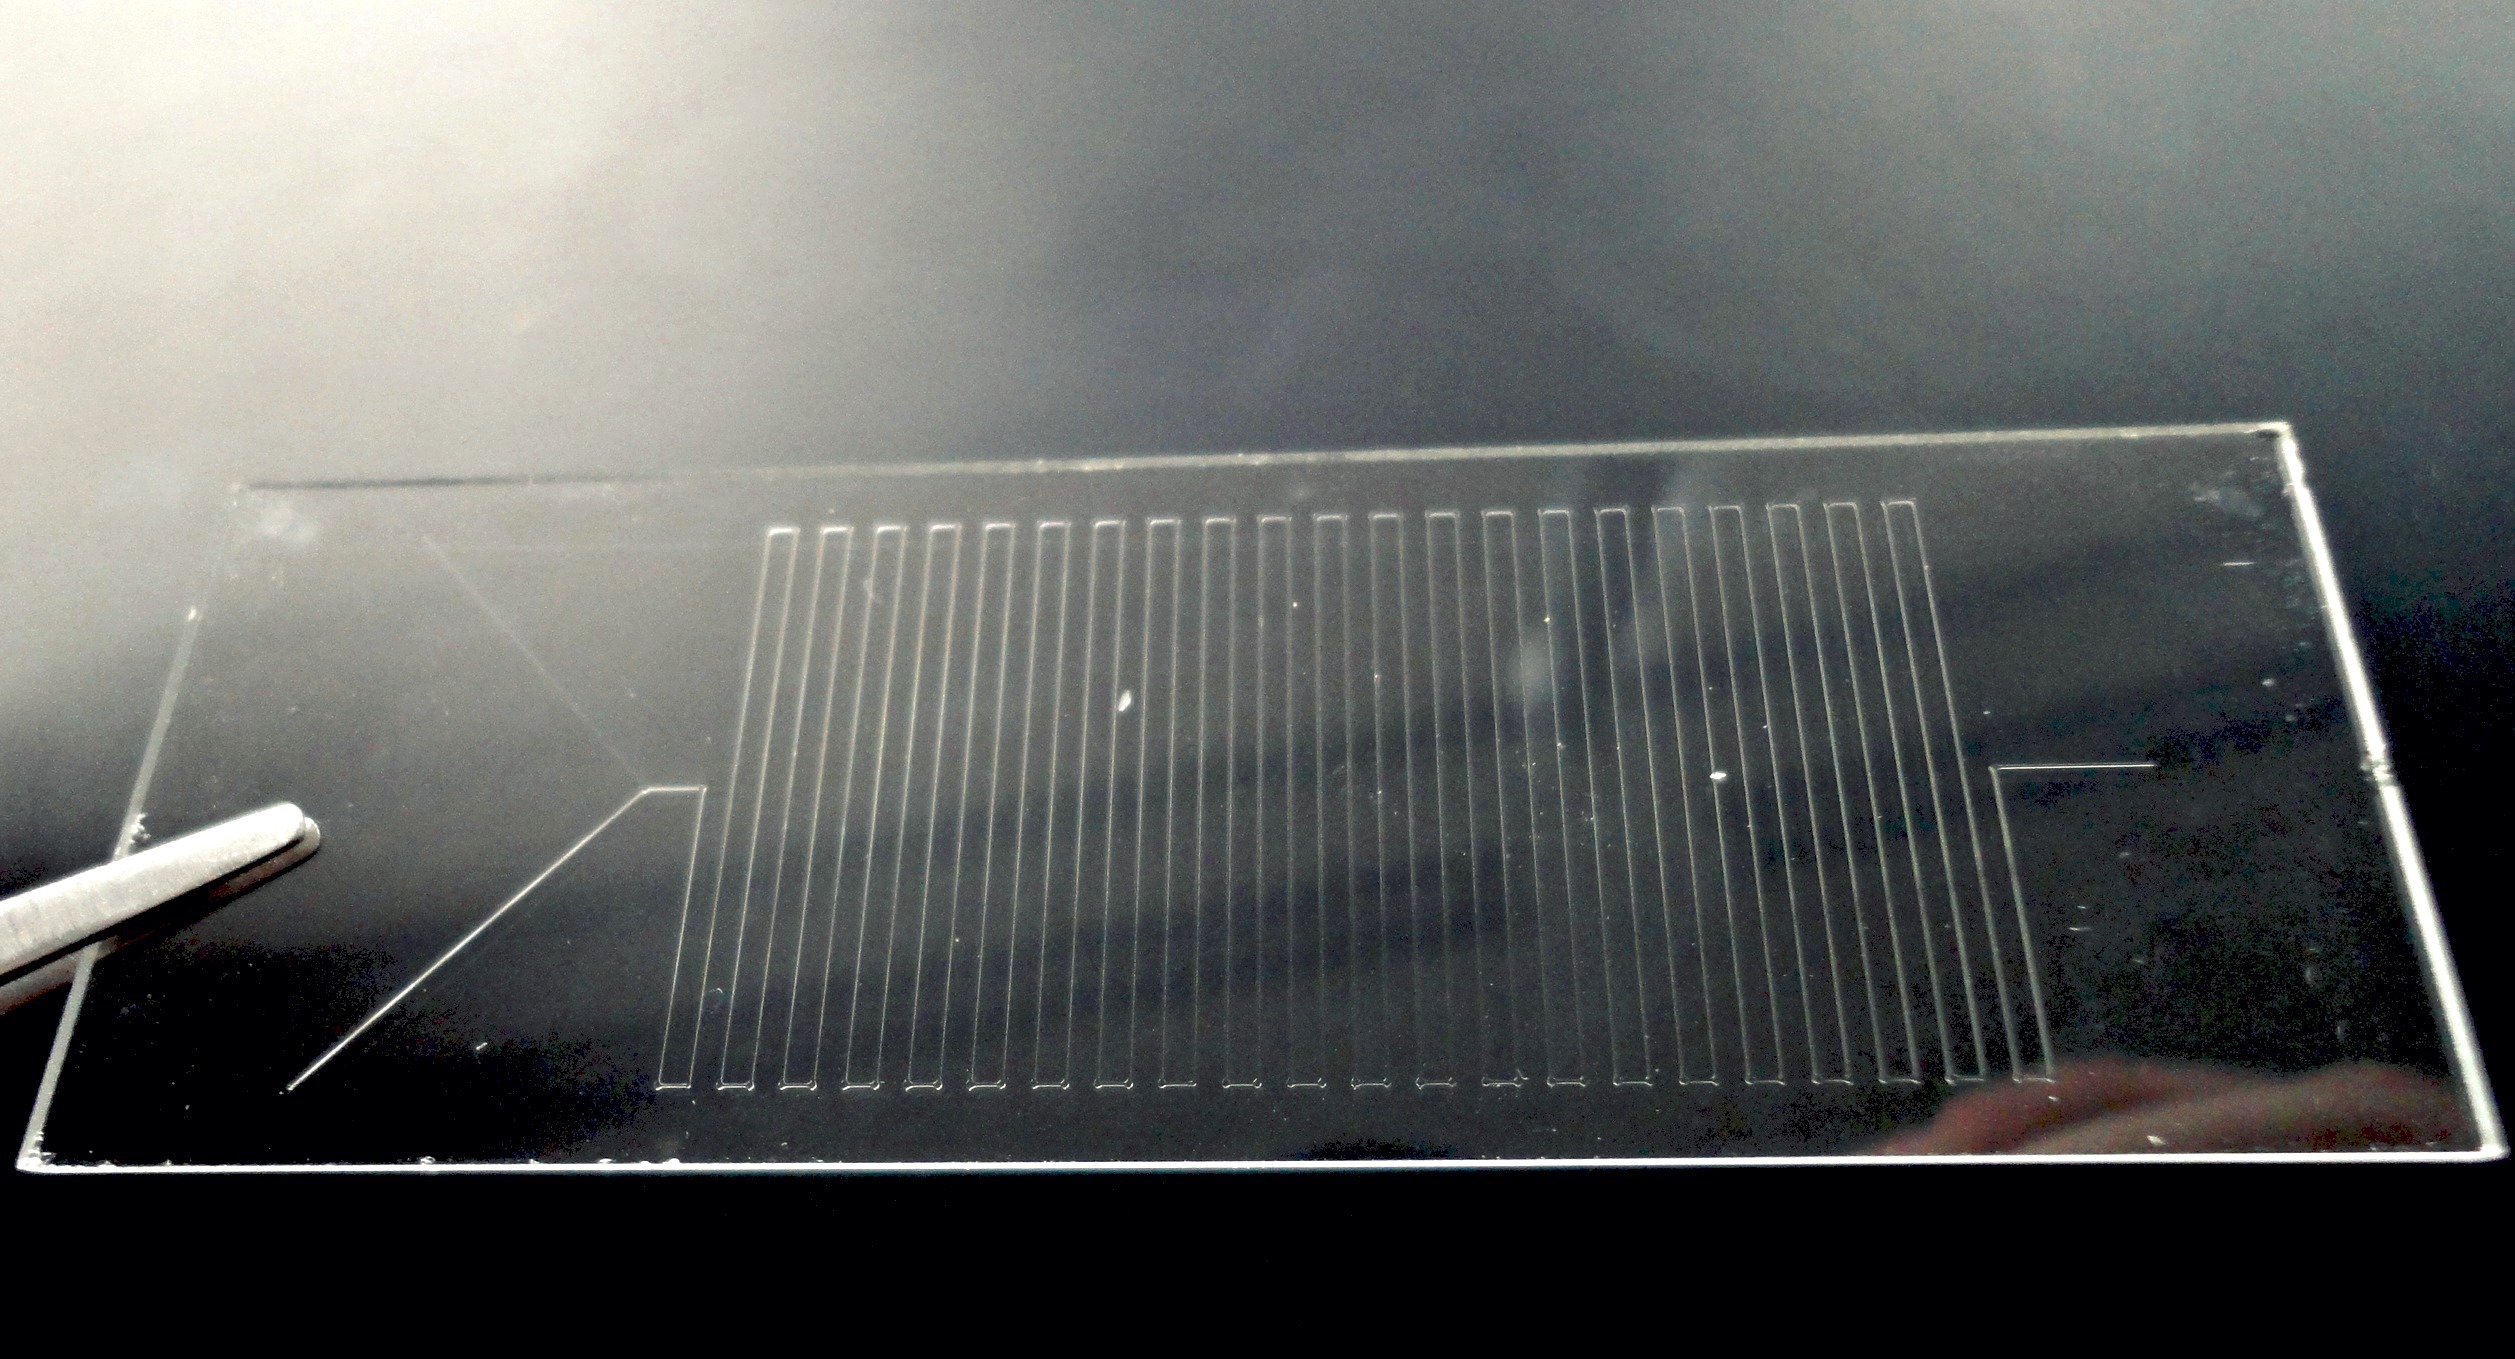 A microfluidic chip fabricated using the direct laser writing system.